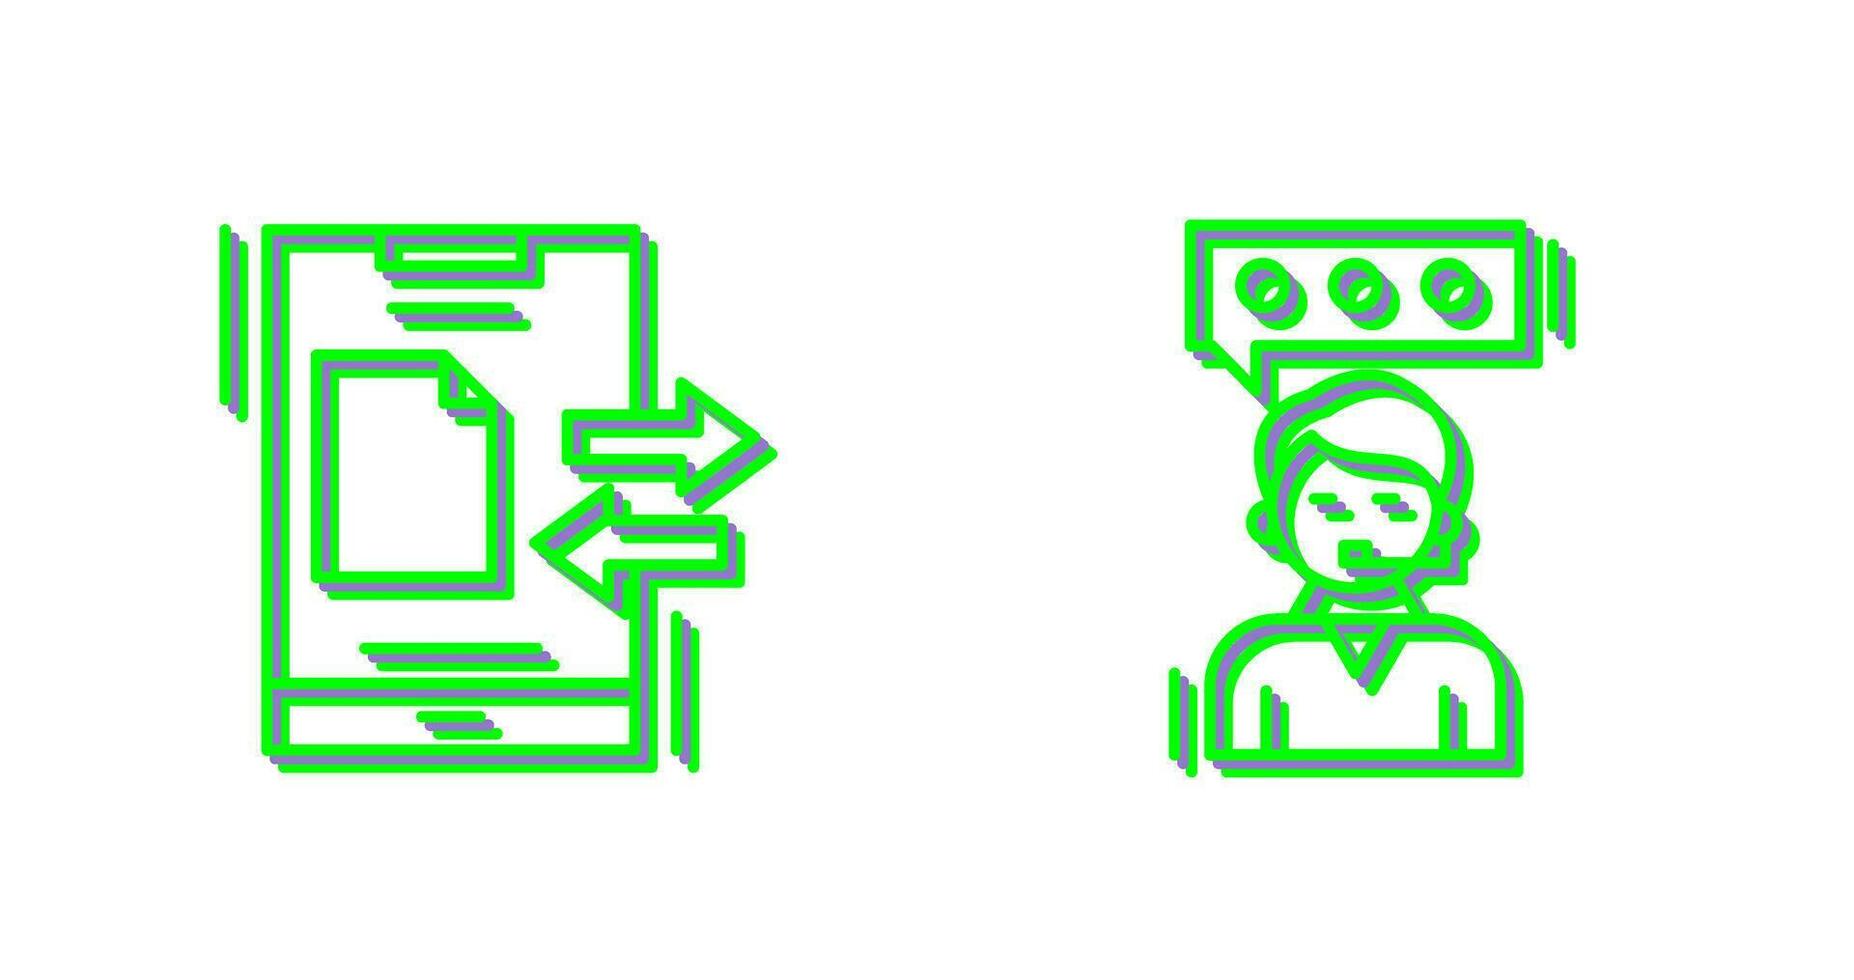 Data Transfer and Client Service Icon vector